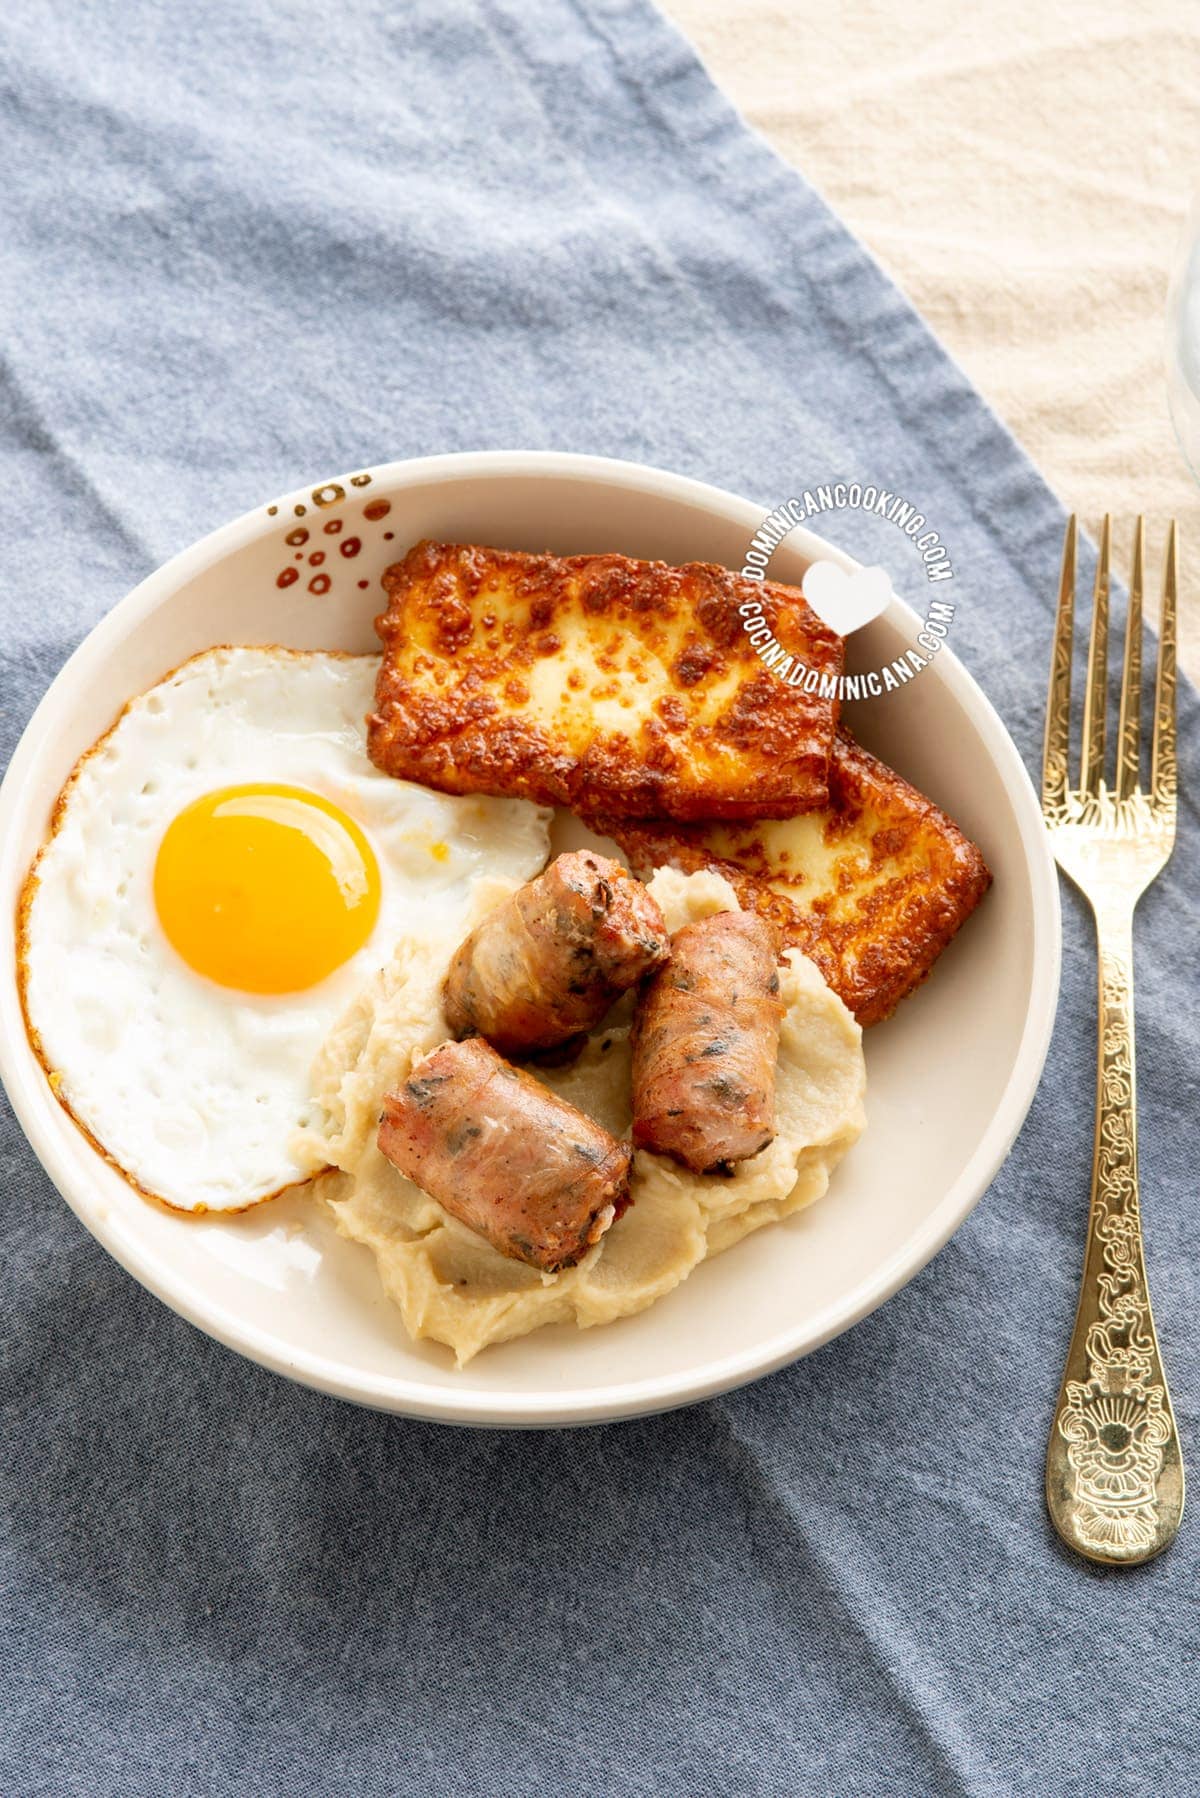 Dominican keto breakfast of fried cheese, egg and sausage with mash seen from above